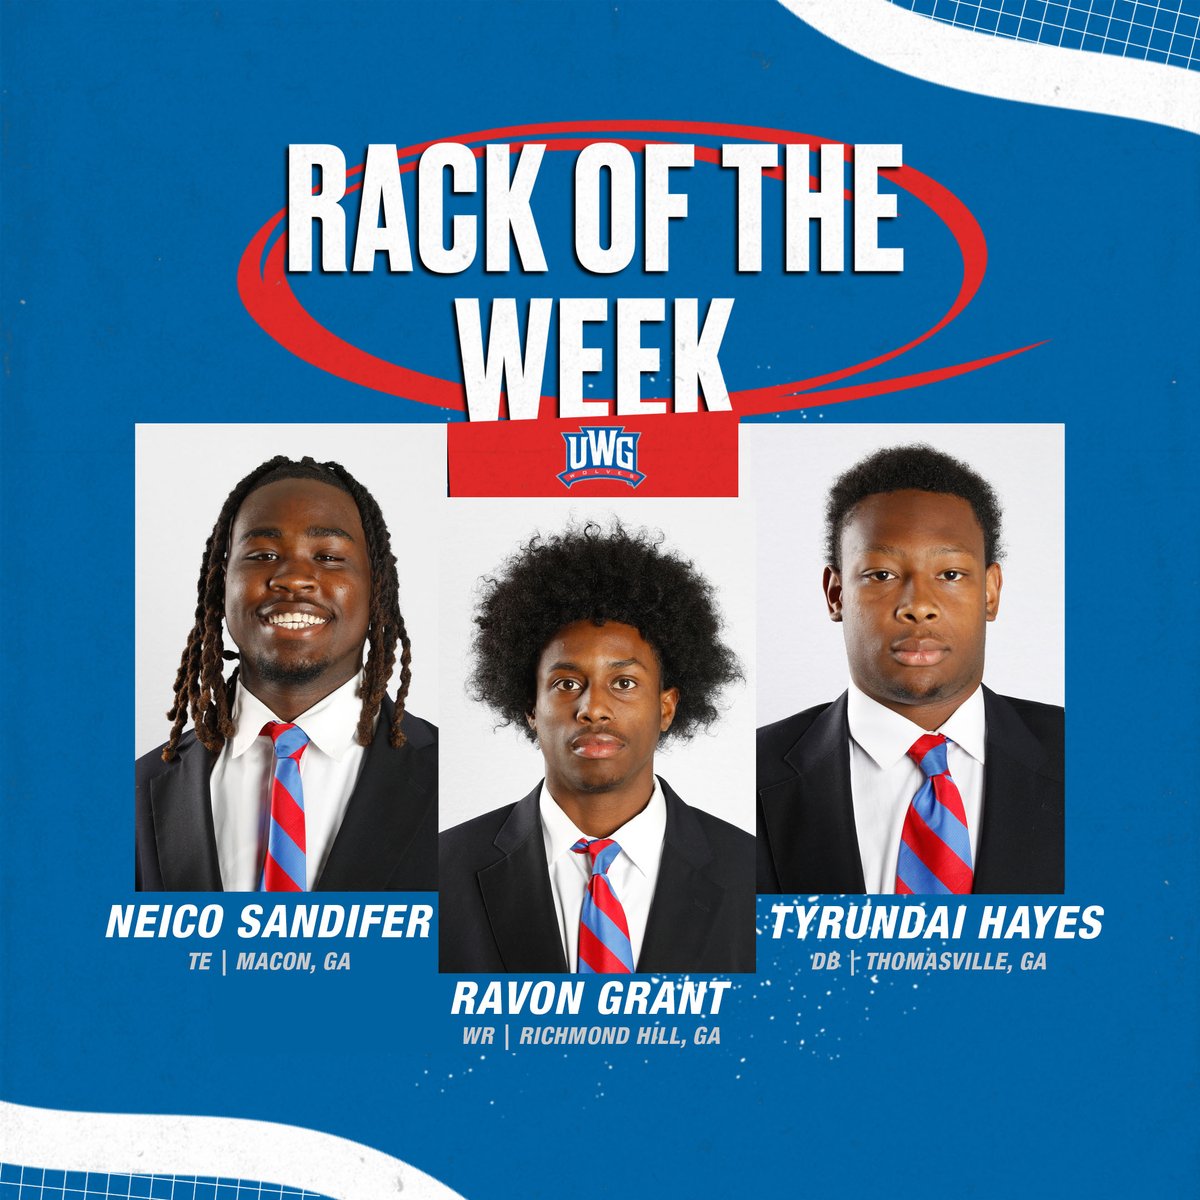 Here's this week's Rack of the Week ‼️  Congrats to Neico, Ray, and Tyrundai! #WeRunTogether #WestIsComing